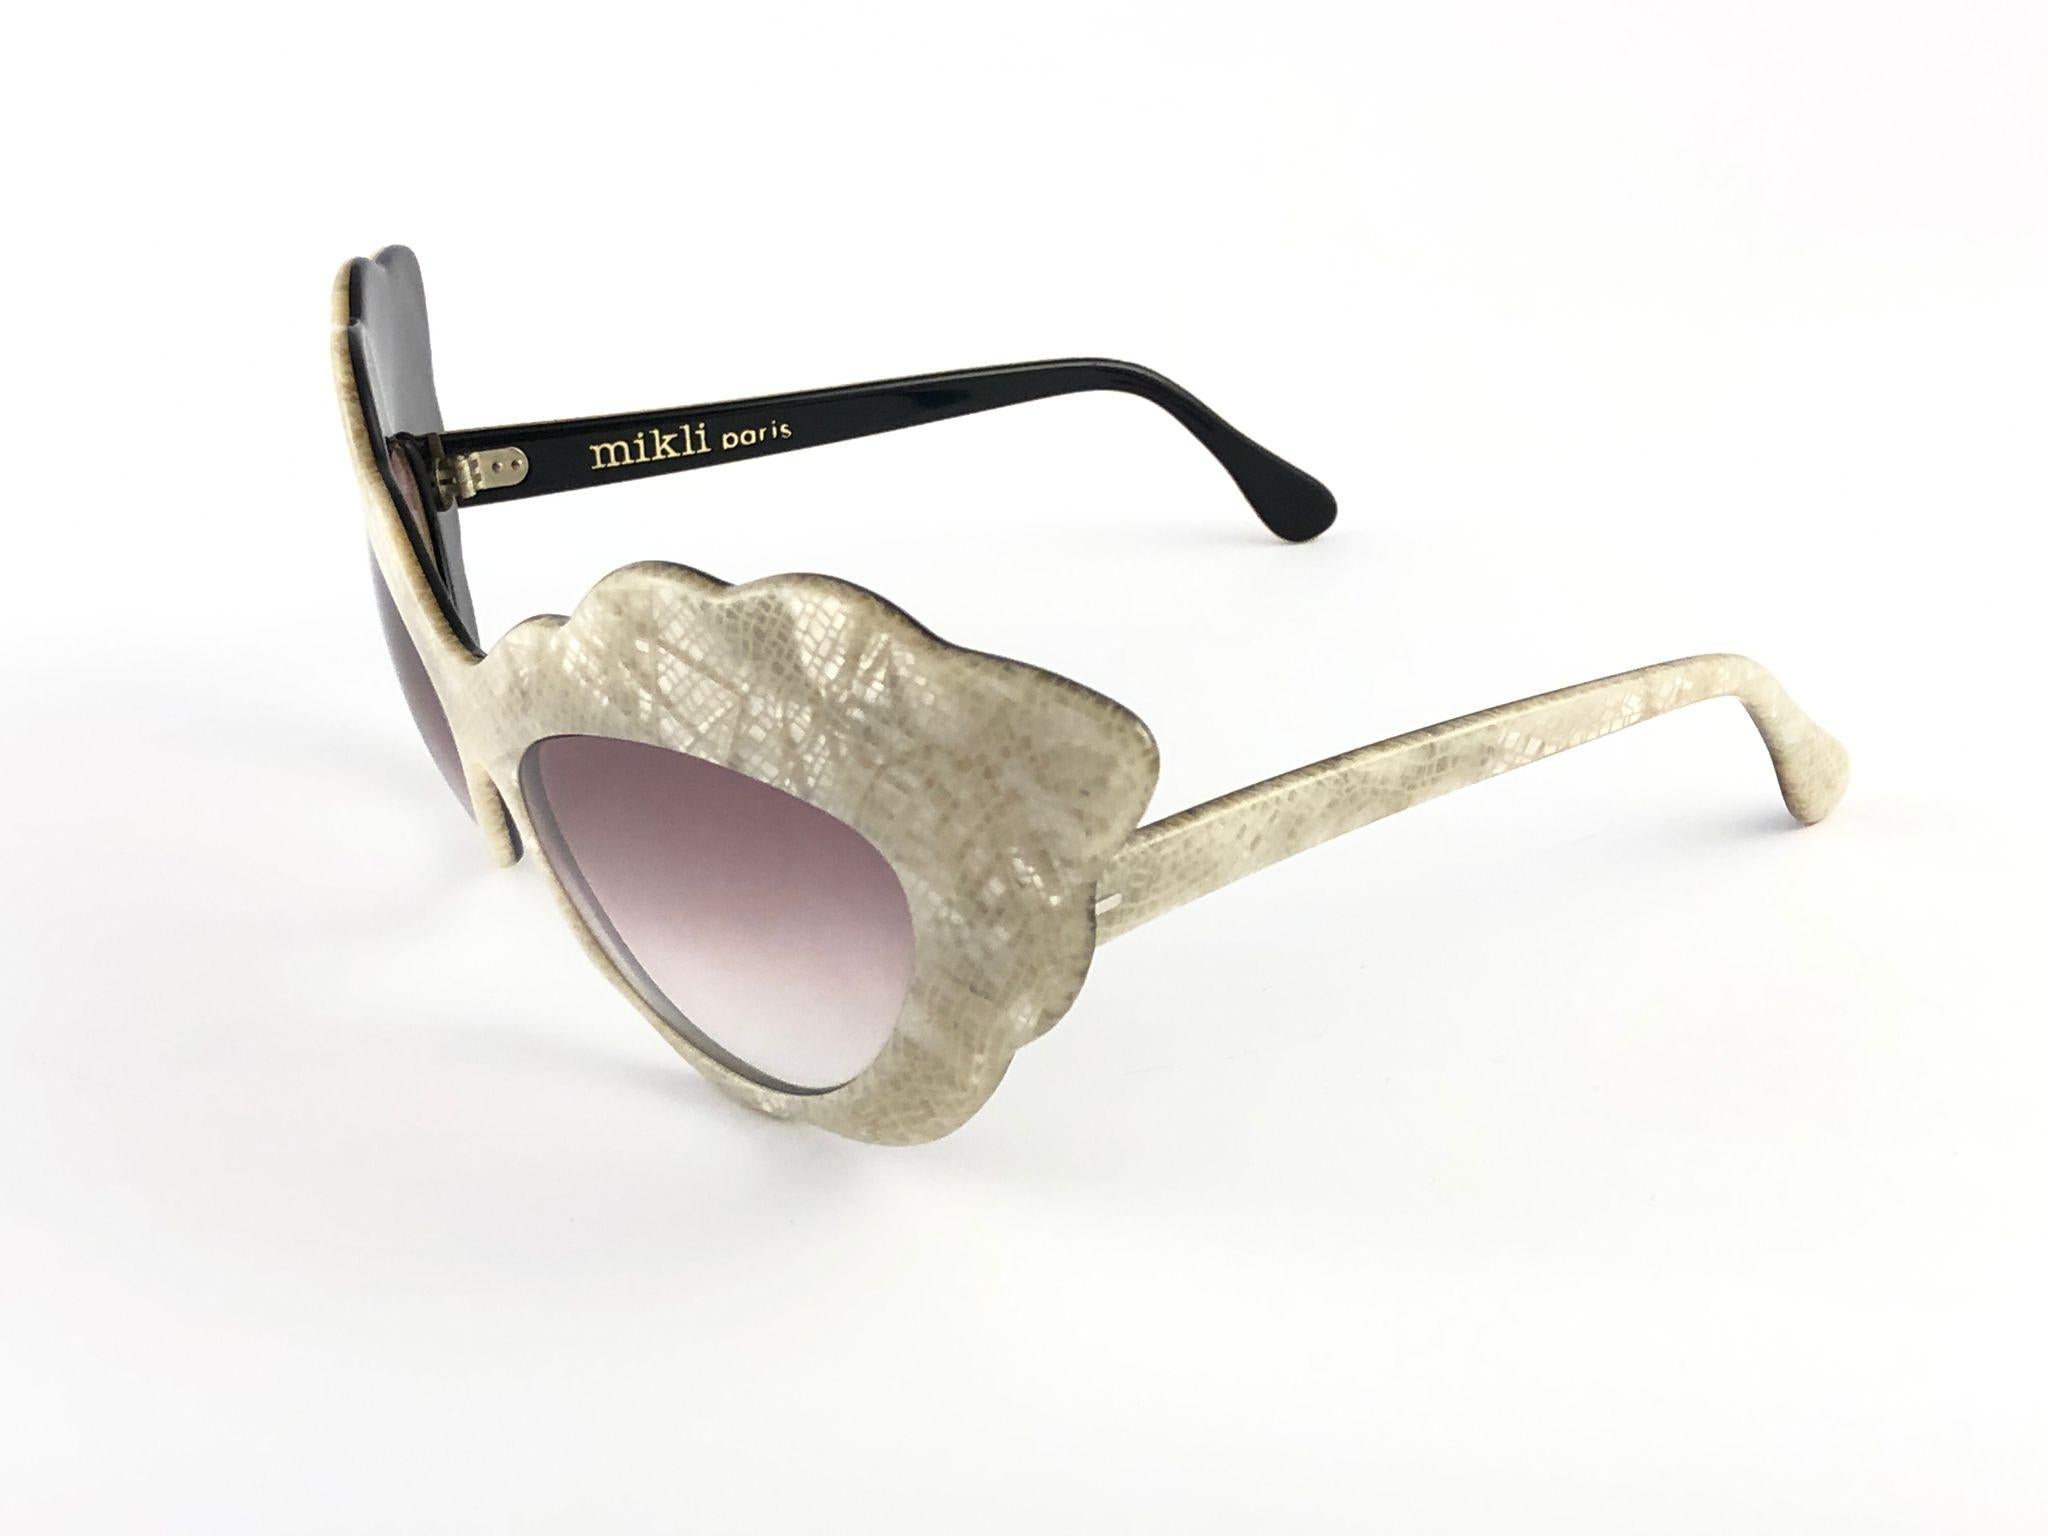 Seldom Vintage Rare Alain Mikli 1980 oversized cat eye acetate mother of pearl effect frame.

Light gradient lenses.

Please consider that this item is nearly 40 years old so it could show minor sign of wear due to storage.

Made in France.

FRONT :